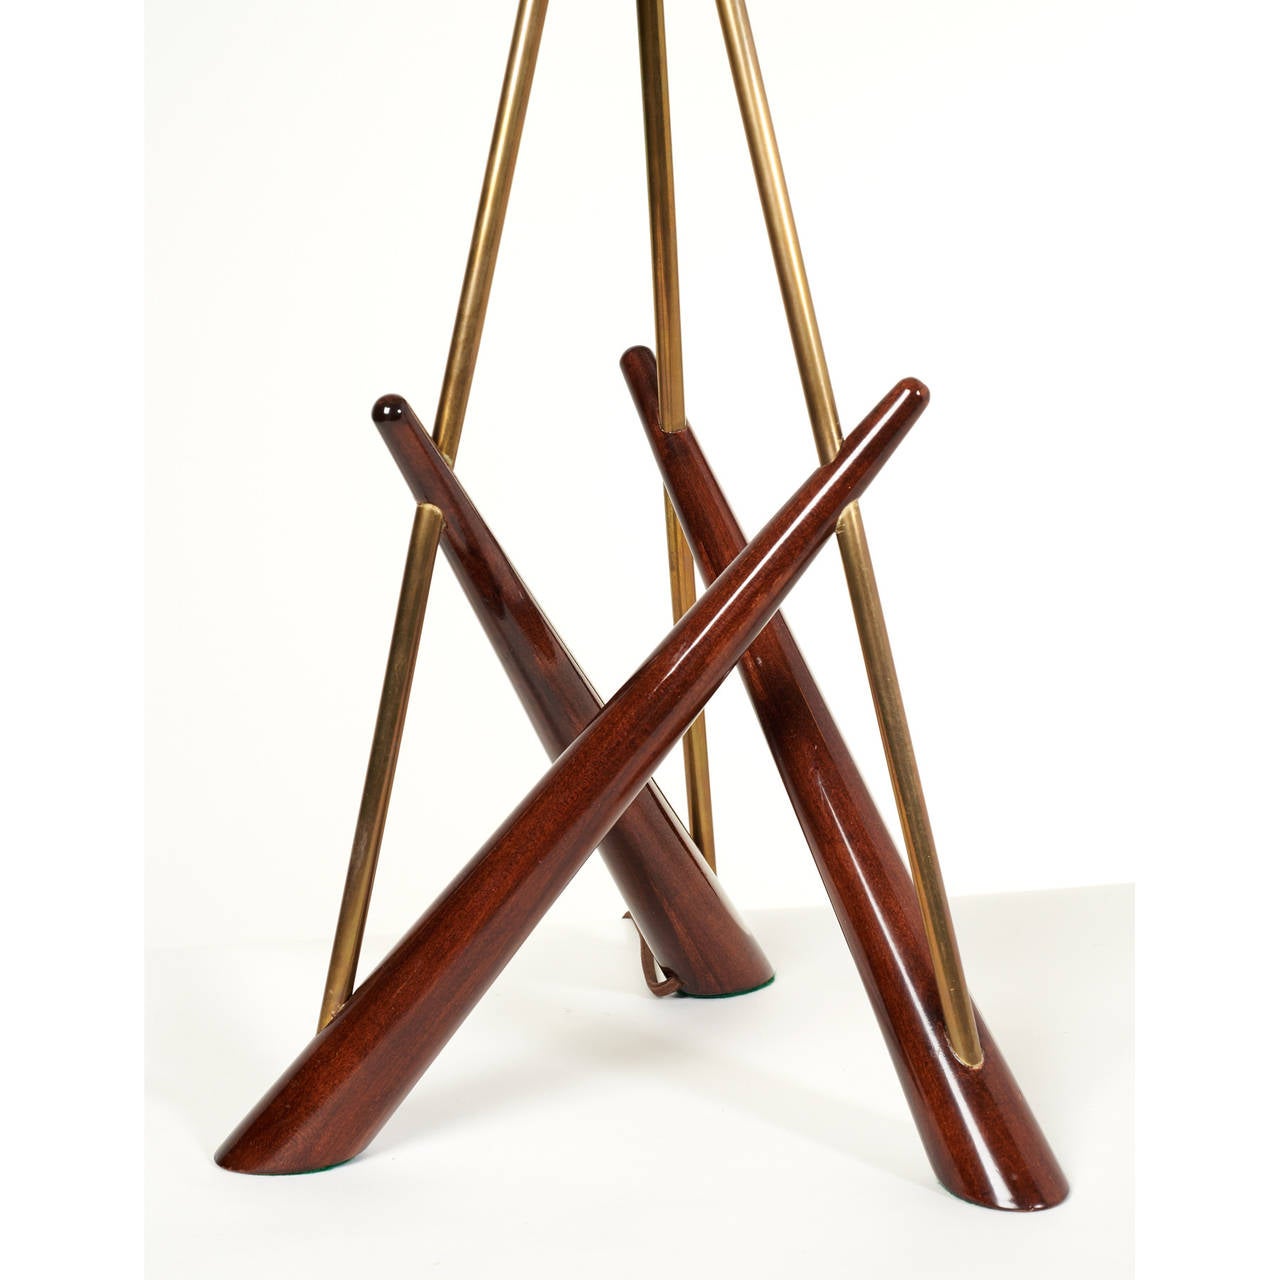 American Pair of ‘Constructivist’ Walnut and Brass Tripod Table Lamps